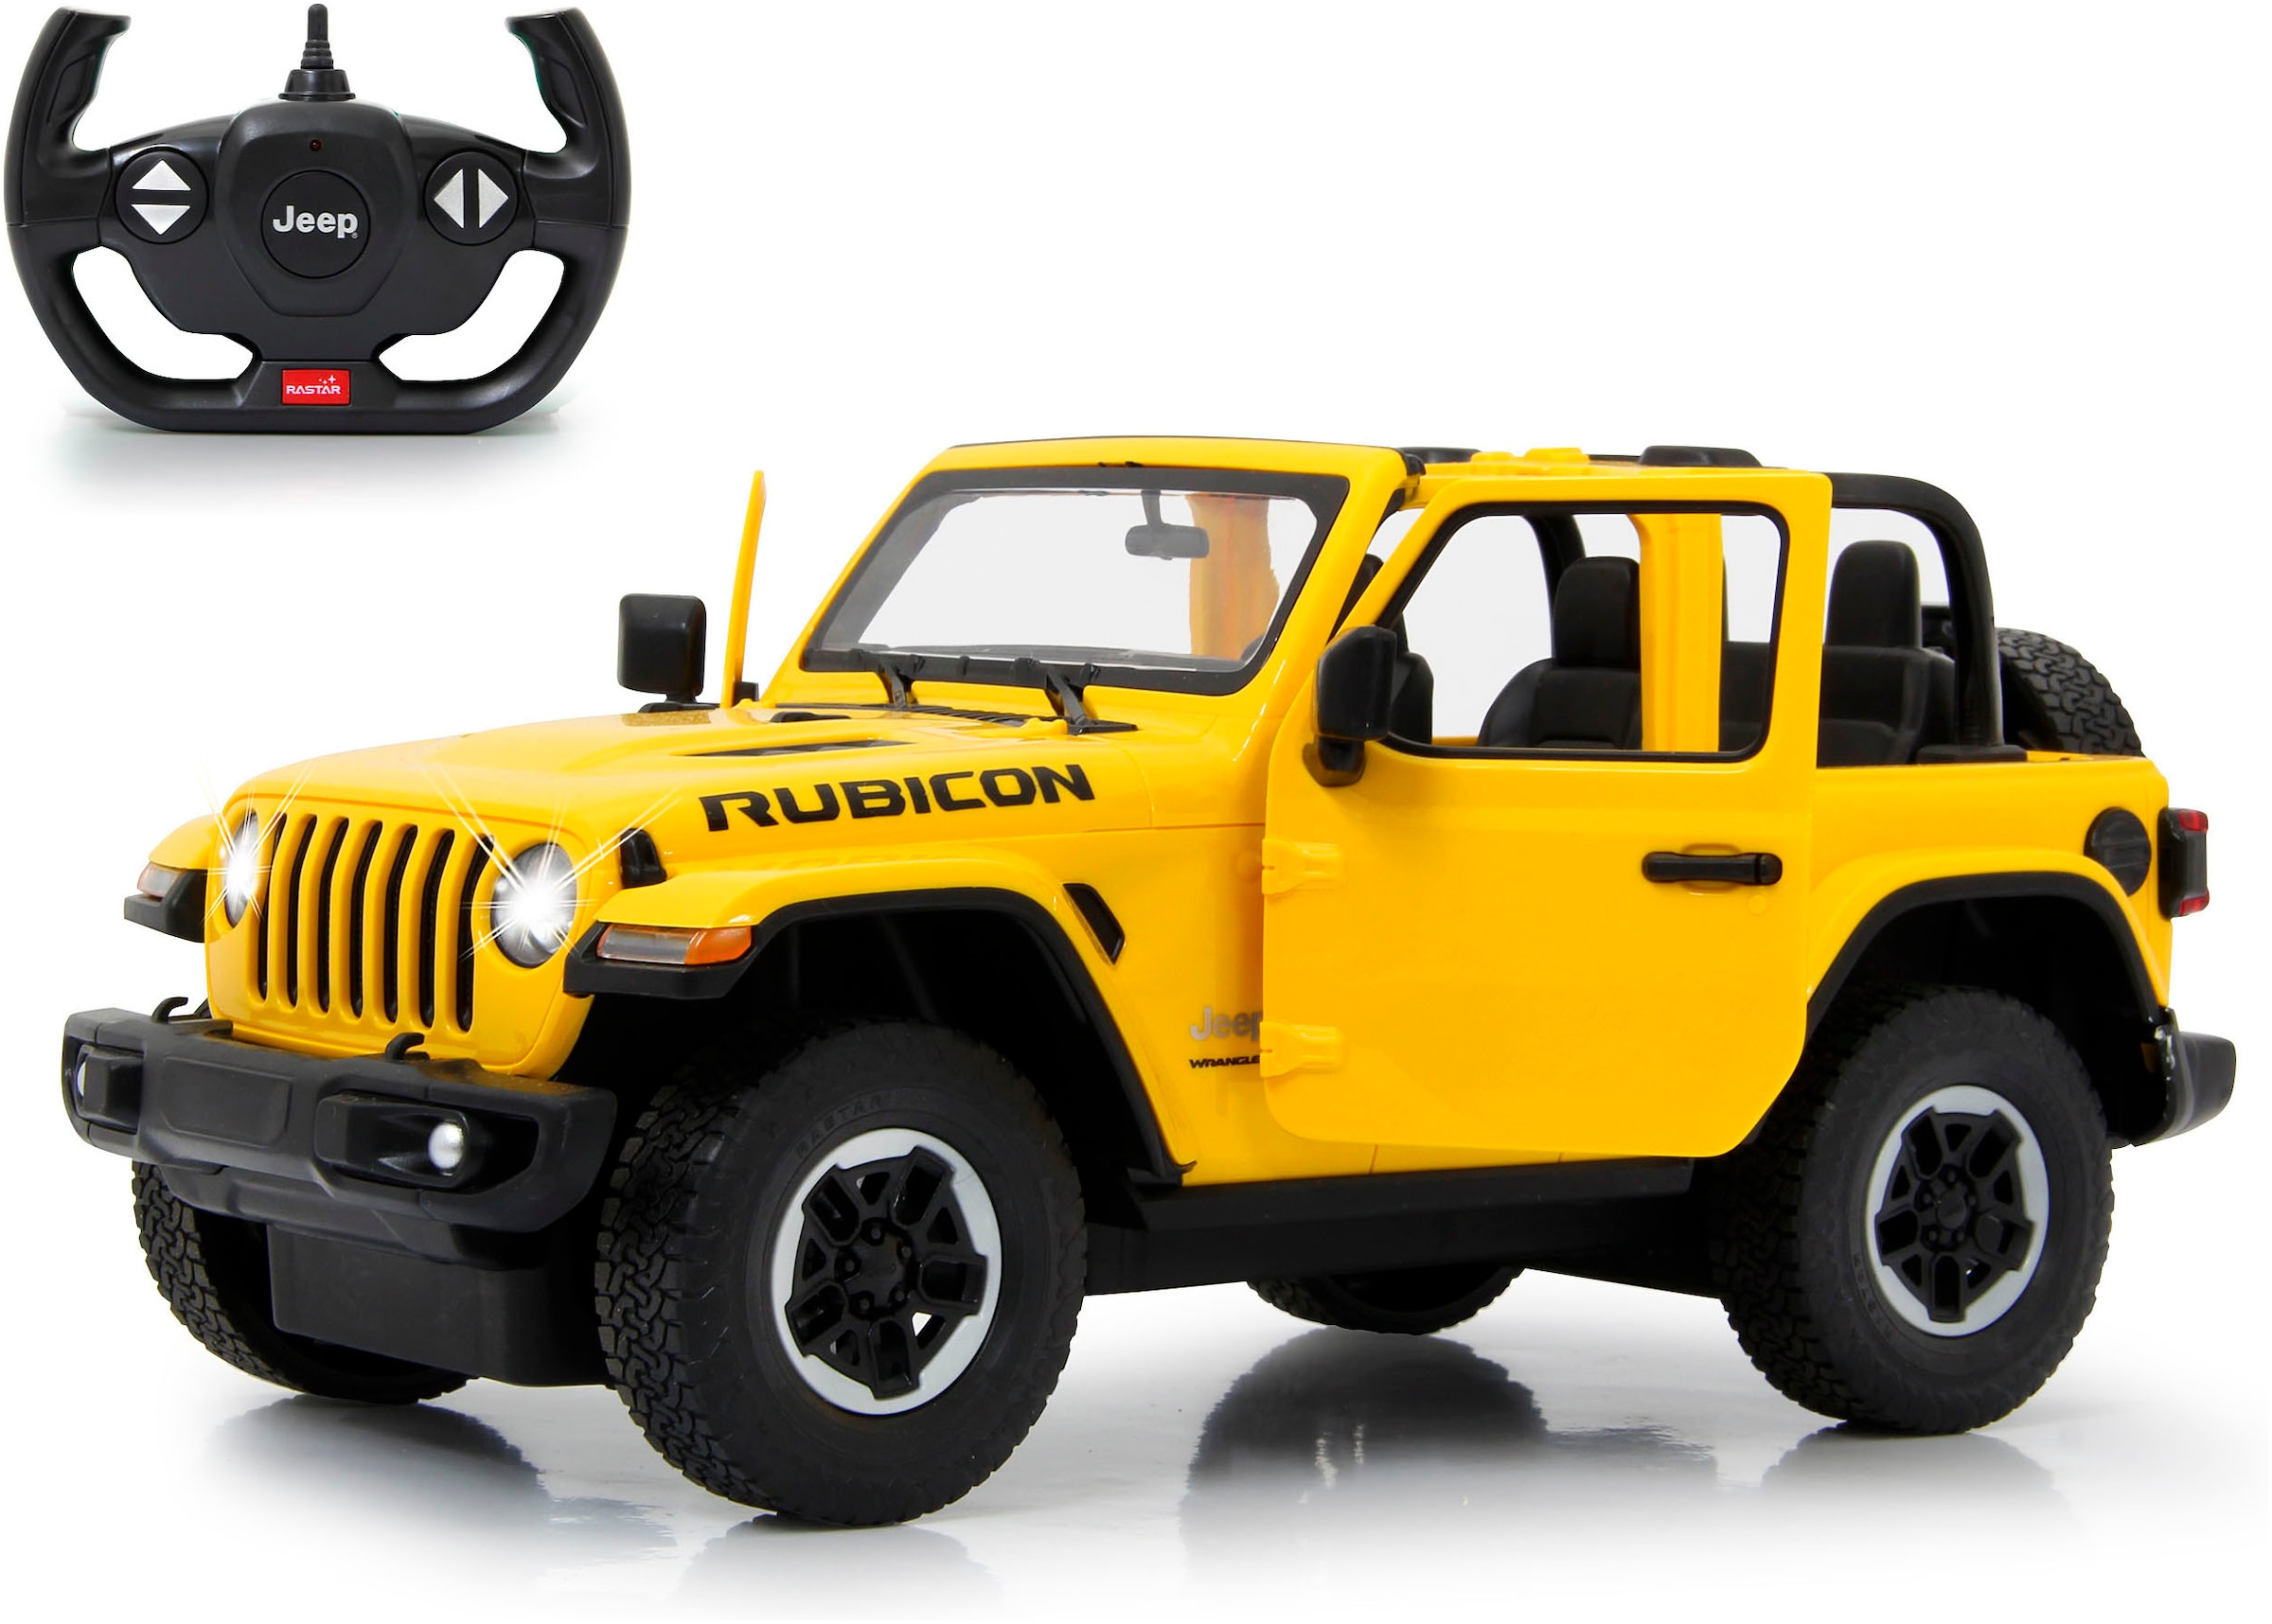 RC-Auto »Deluxe Cars, Jeep Wrangler JL, 1:14, gelb, 2,4GHz«, mit LED-Licht